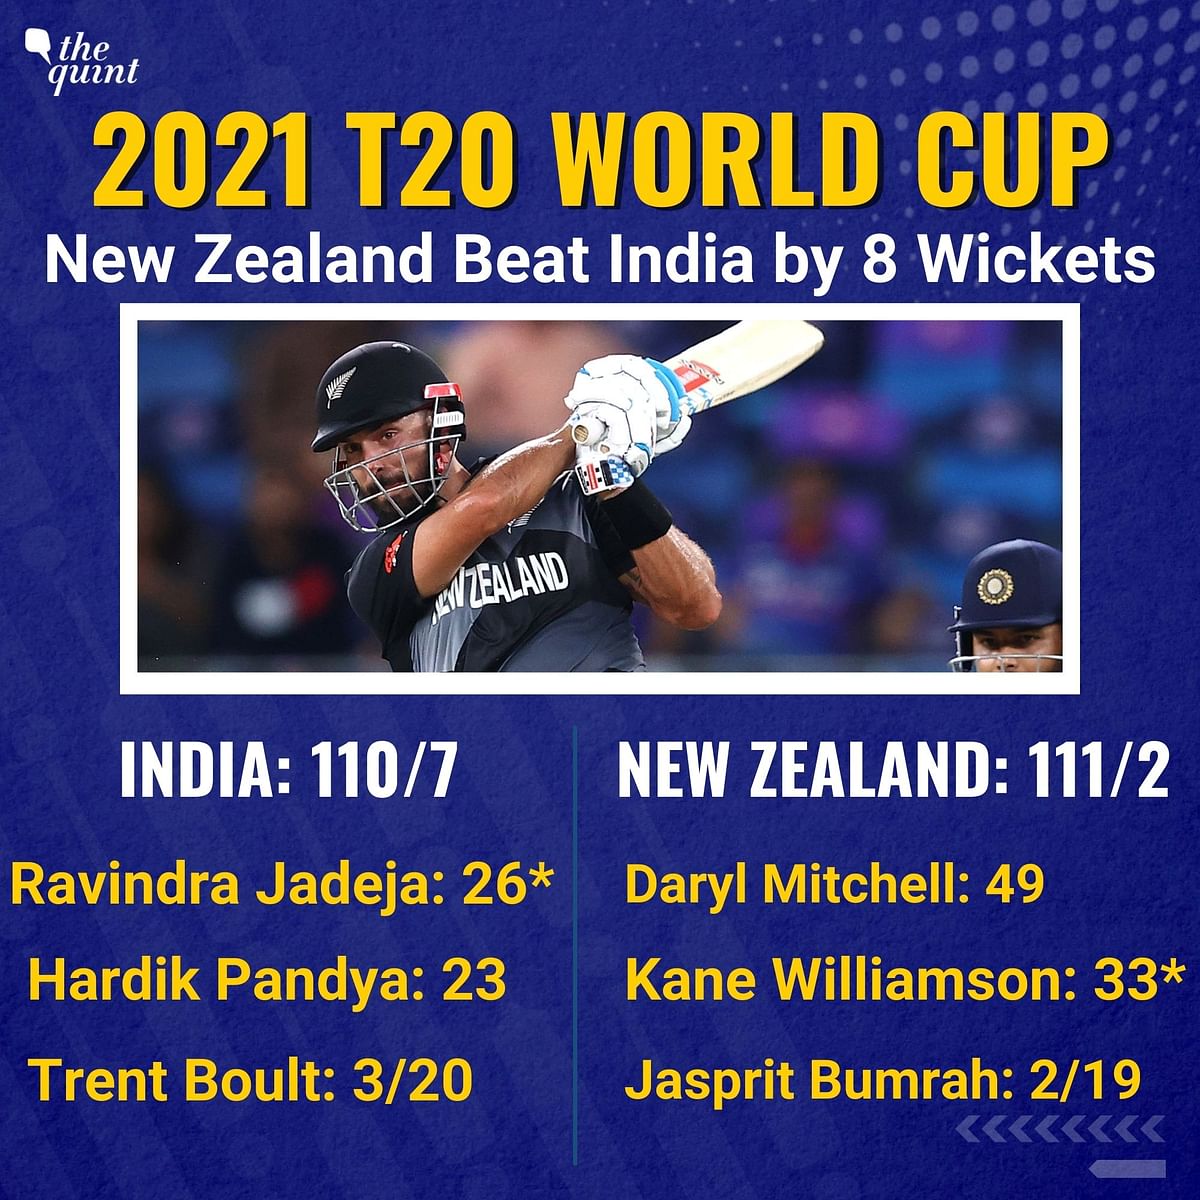 Rohit Sharma batted at No. 3 in T20 World Cup match against New Zealand, who won the game by eight wickets